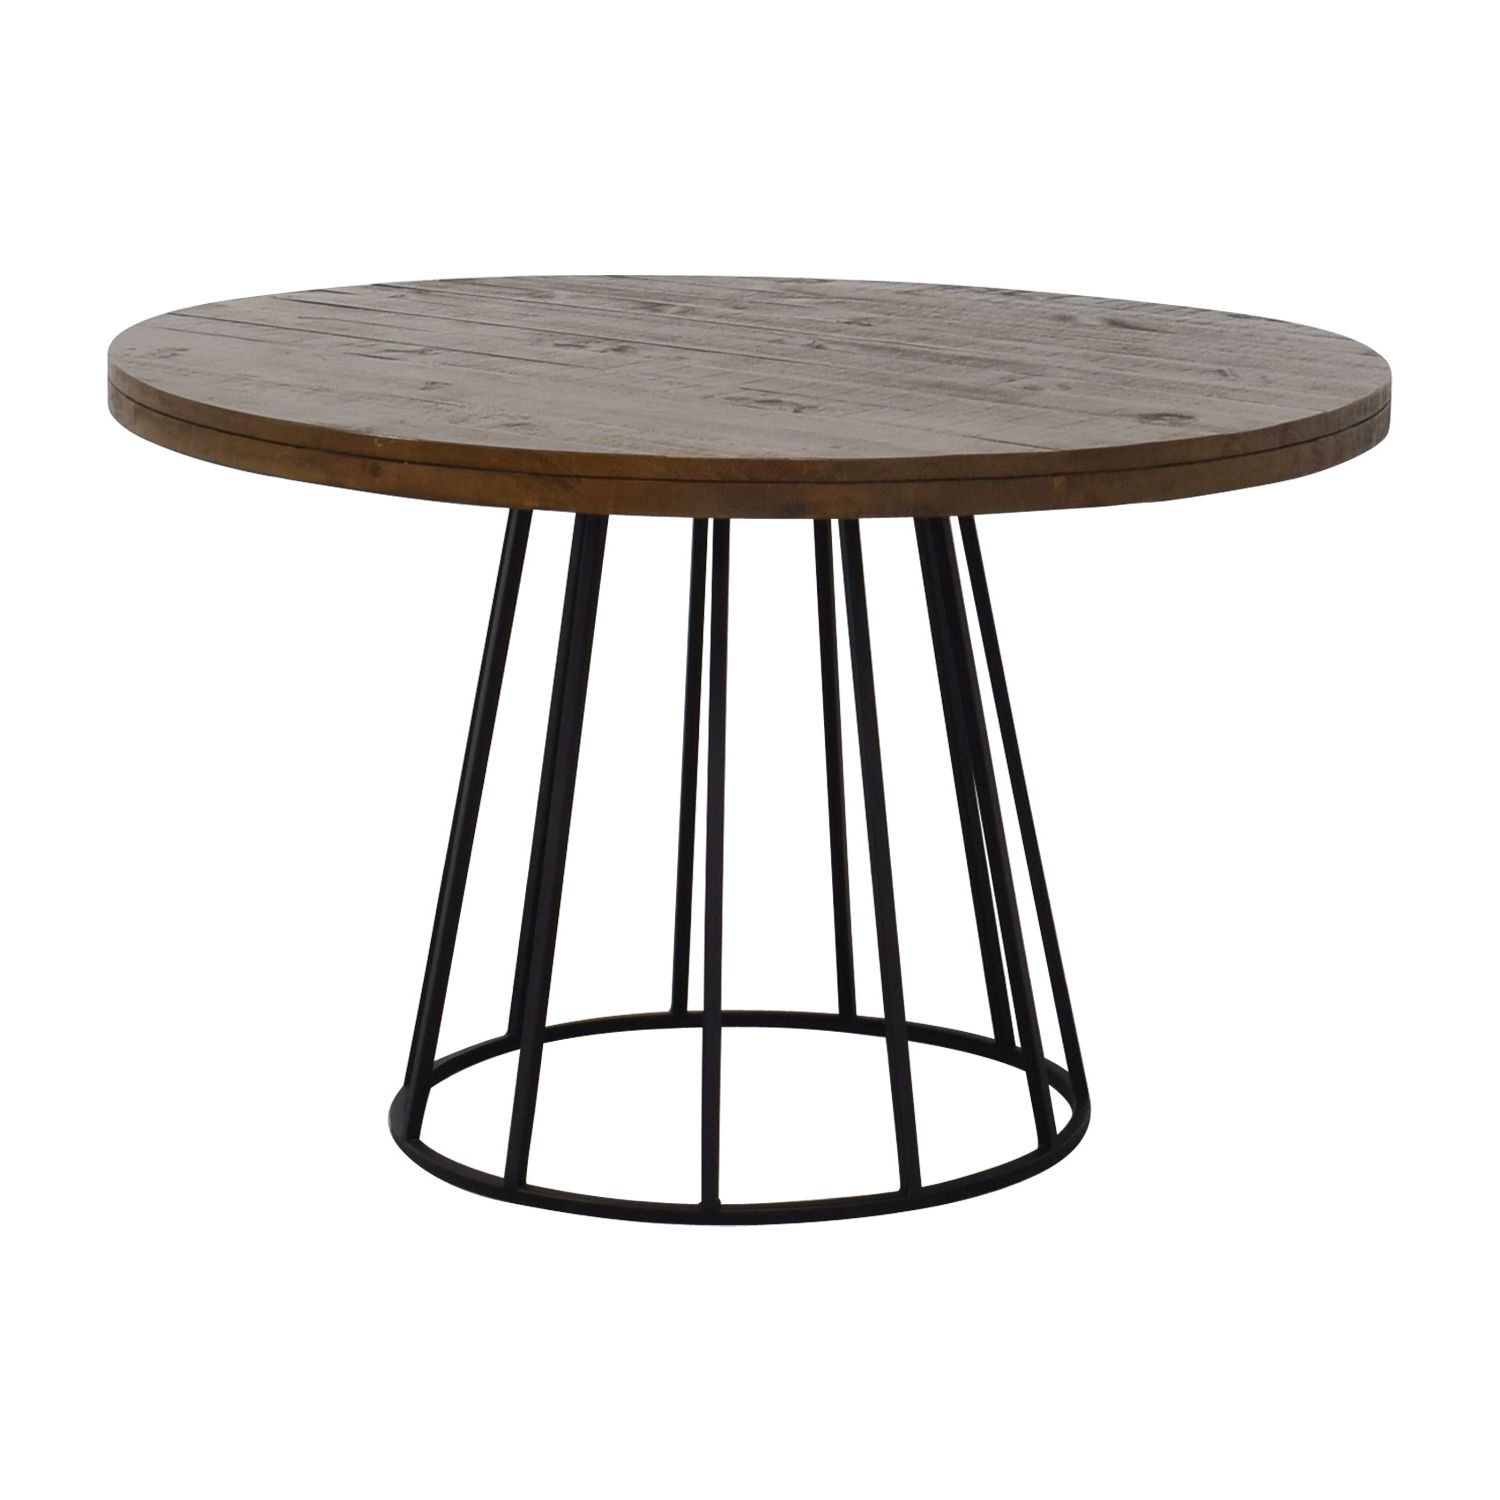 [%63% Off – Mercury Row Mercury Row Grus Rustic Wood Round Pertaining To Famous Bekasi 63'' Dining Tables|bekasi 63'' Dining Tables In Current 63% Off – Mercury Row Mercury Row Grus Rustic Wood Round|current Bekasi 63'' Dining Tables Inside 63% Off – Mercury Row Mercury Row Grus Rustic Wood Round|famous 63% Off – Mercury Row Mercury Row Grus Rustic Wood Round Inside Bekasi 63'' Dining Tables%] (View 6 of 20)